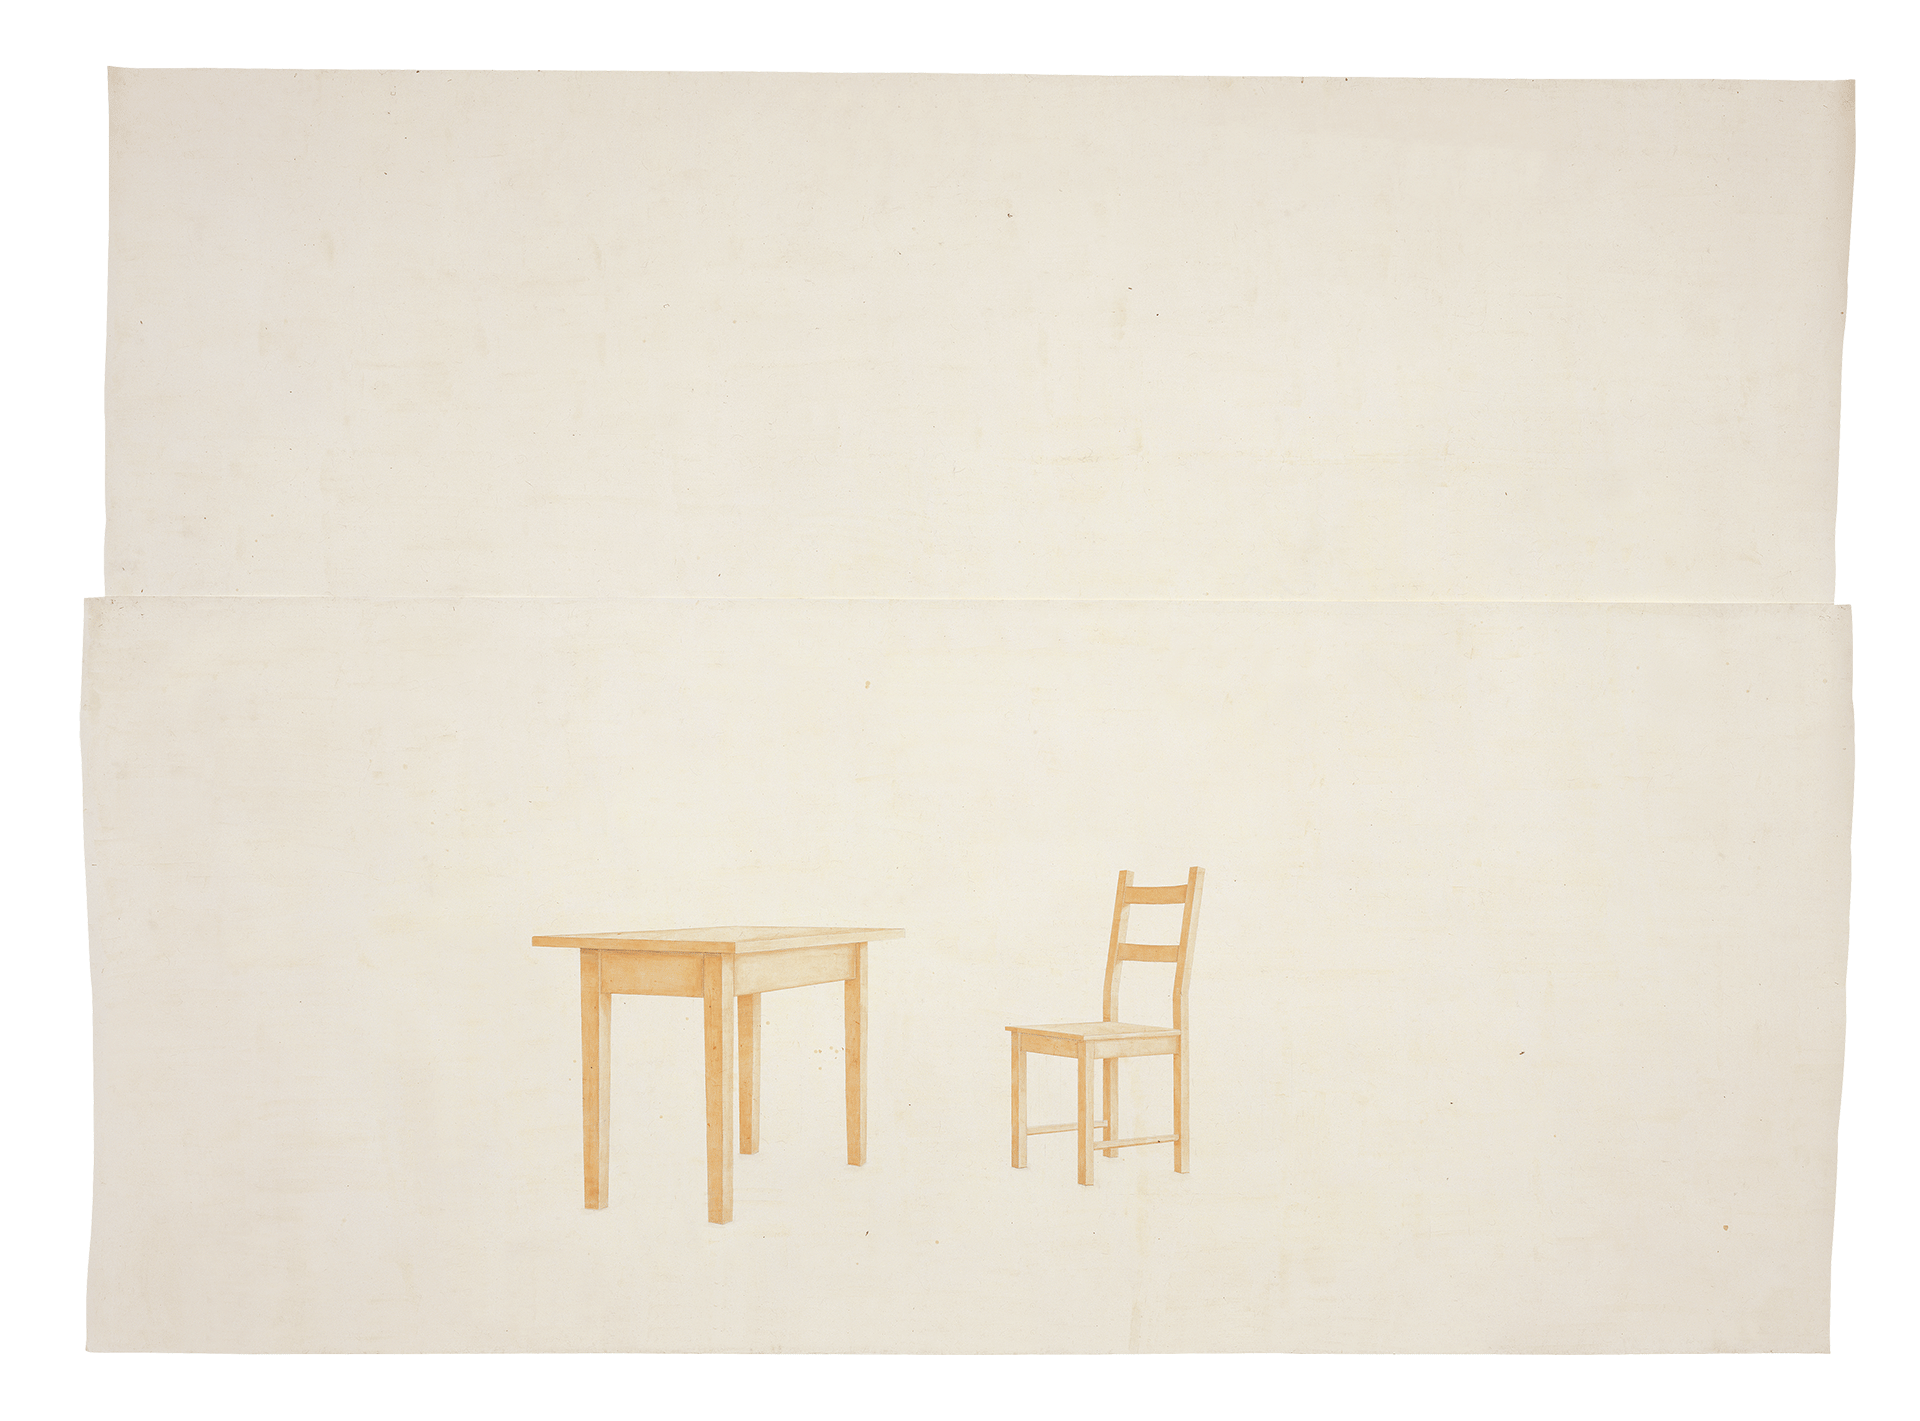 An oil and wax work on paper by Toba Khedoori, titled Untitled (table and chair), dated 1999.